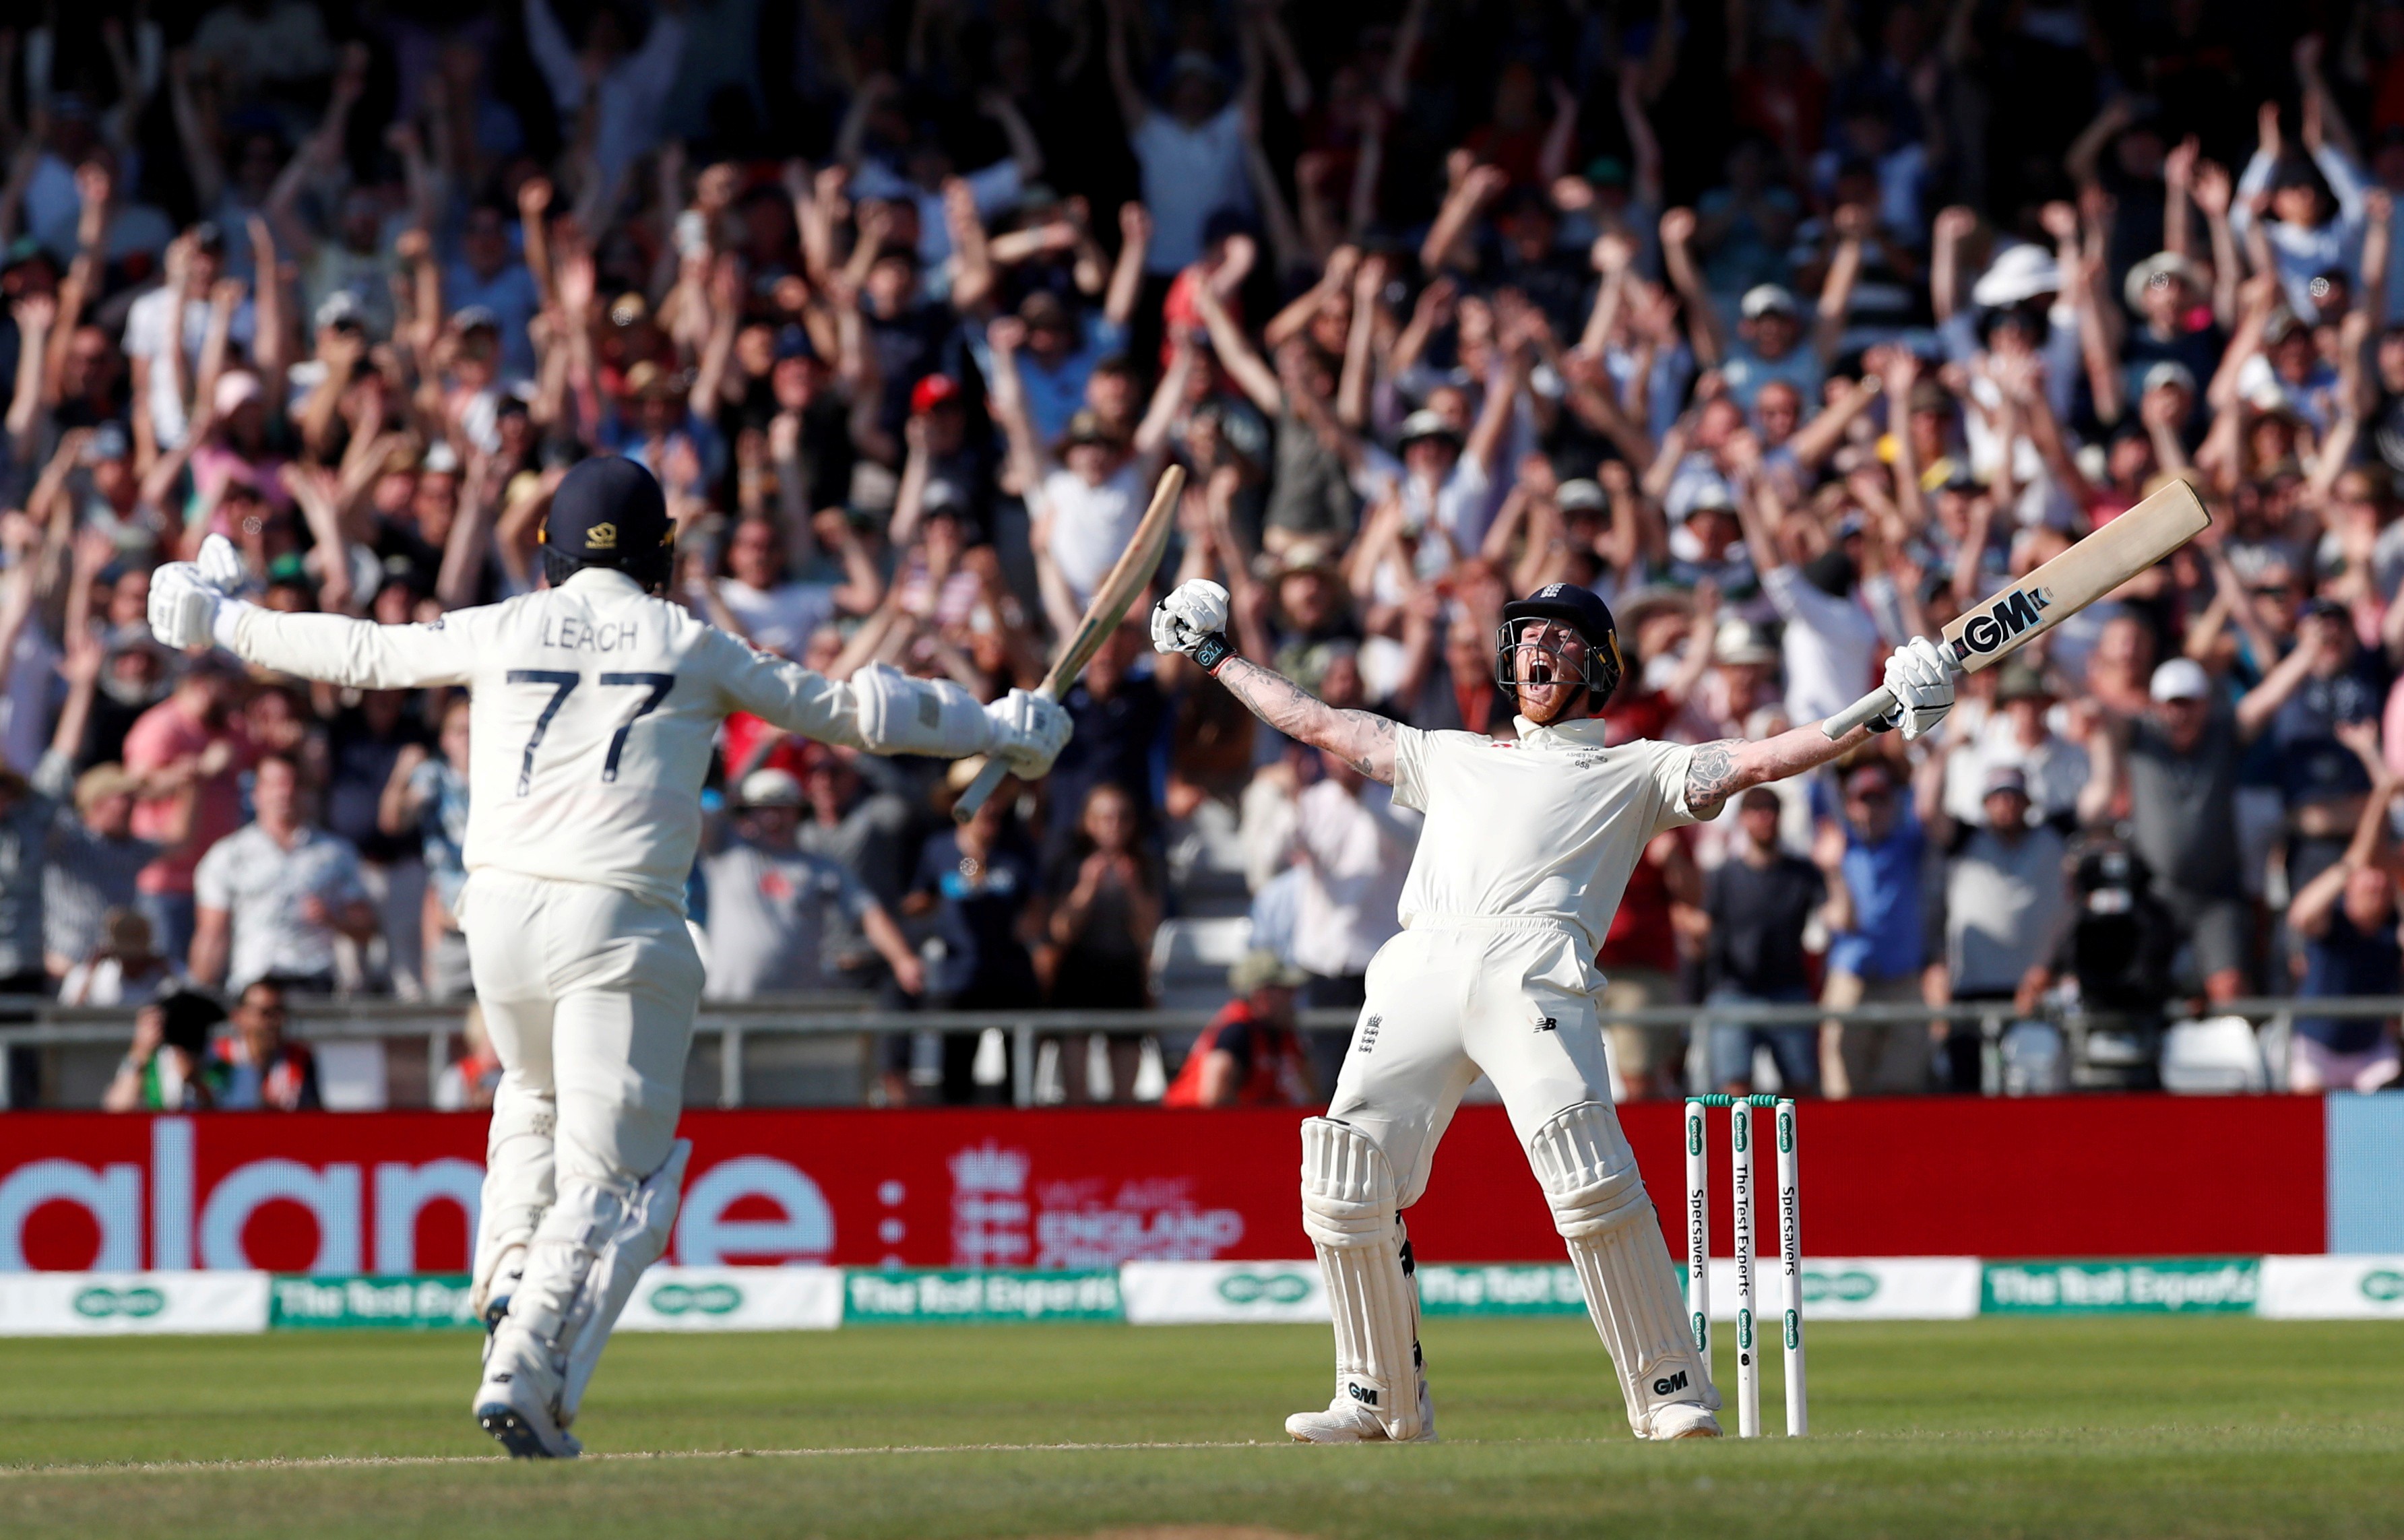 England’s Ben Stokes lets out a roar as he seal the third test for England. Photo: Reuters